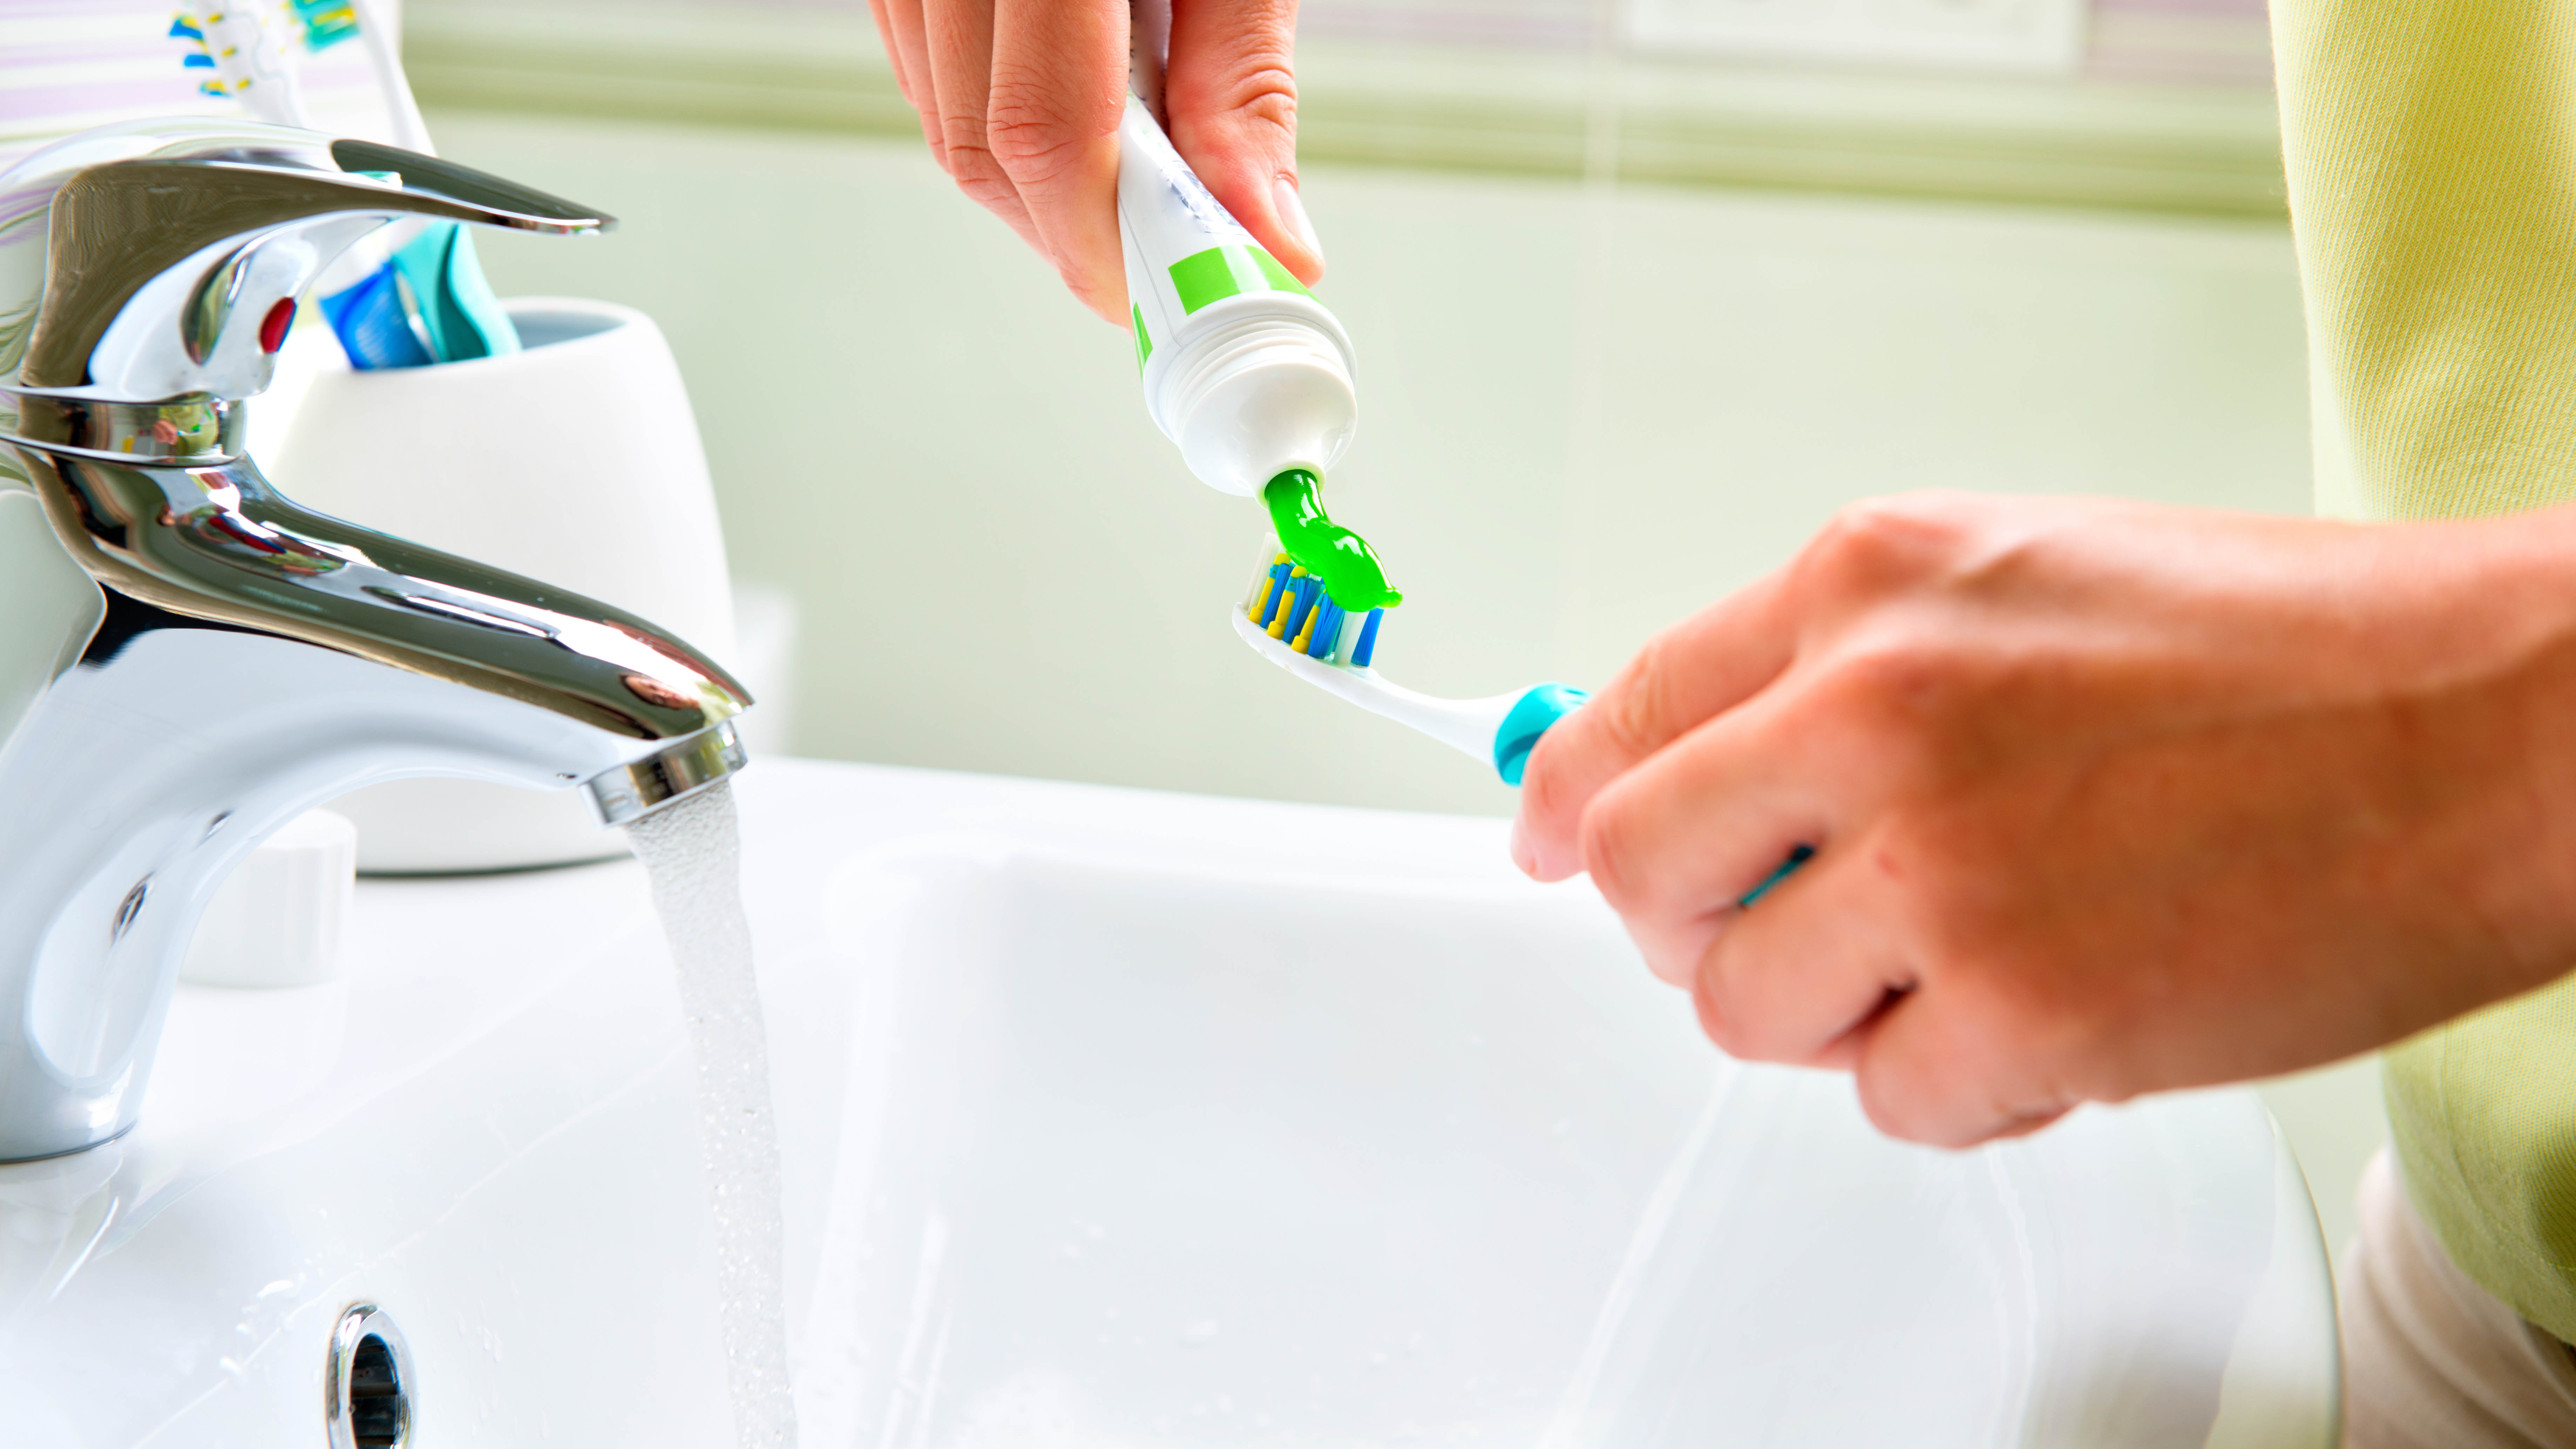 Toothpaste being applied to a toothbrush while the tap is running